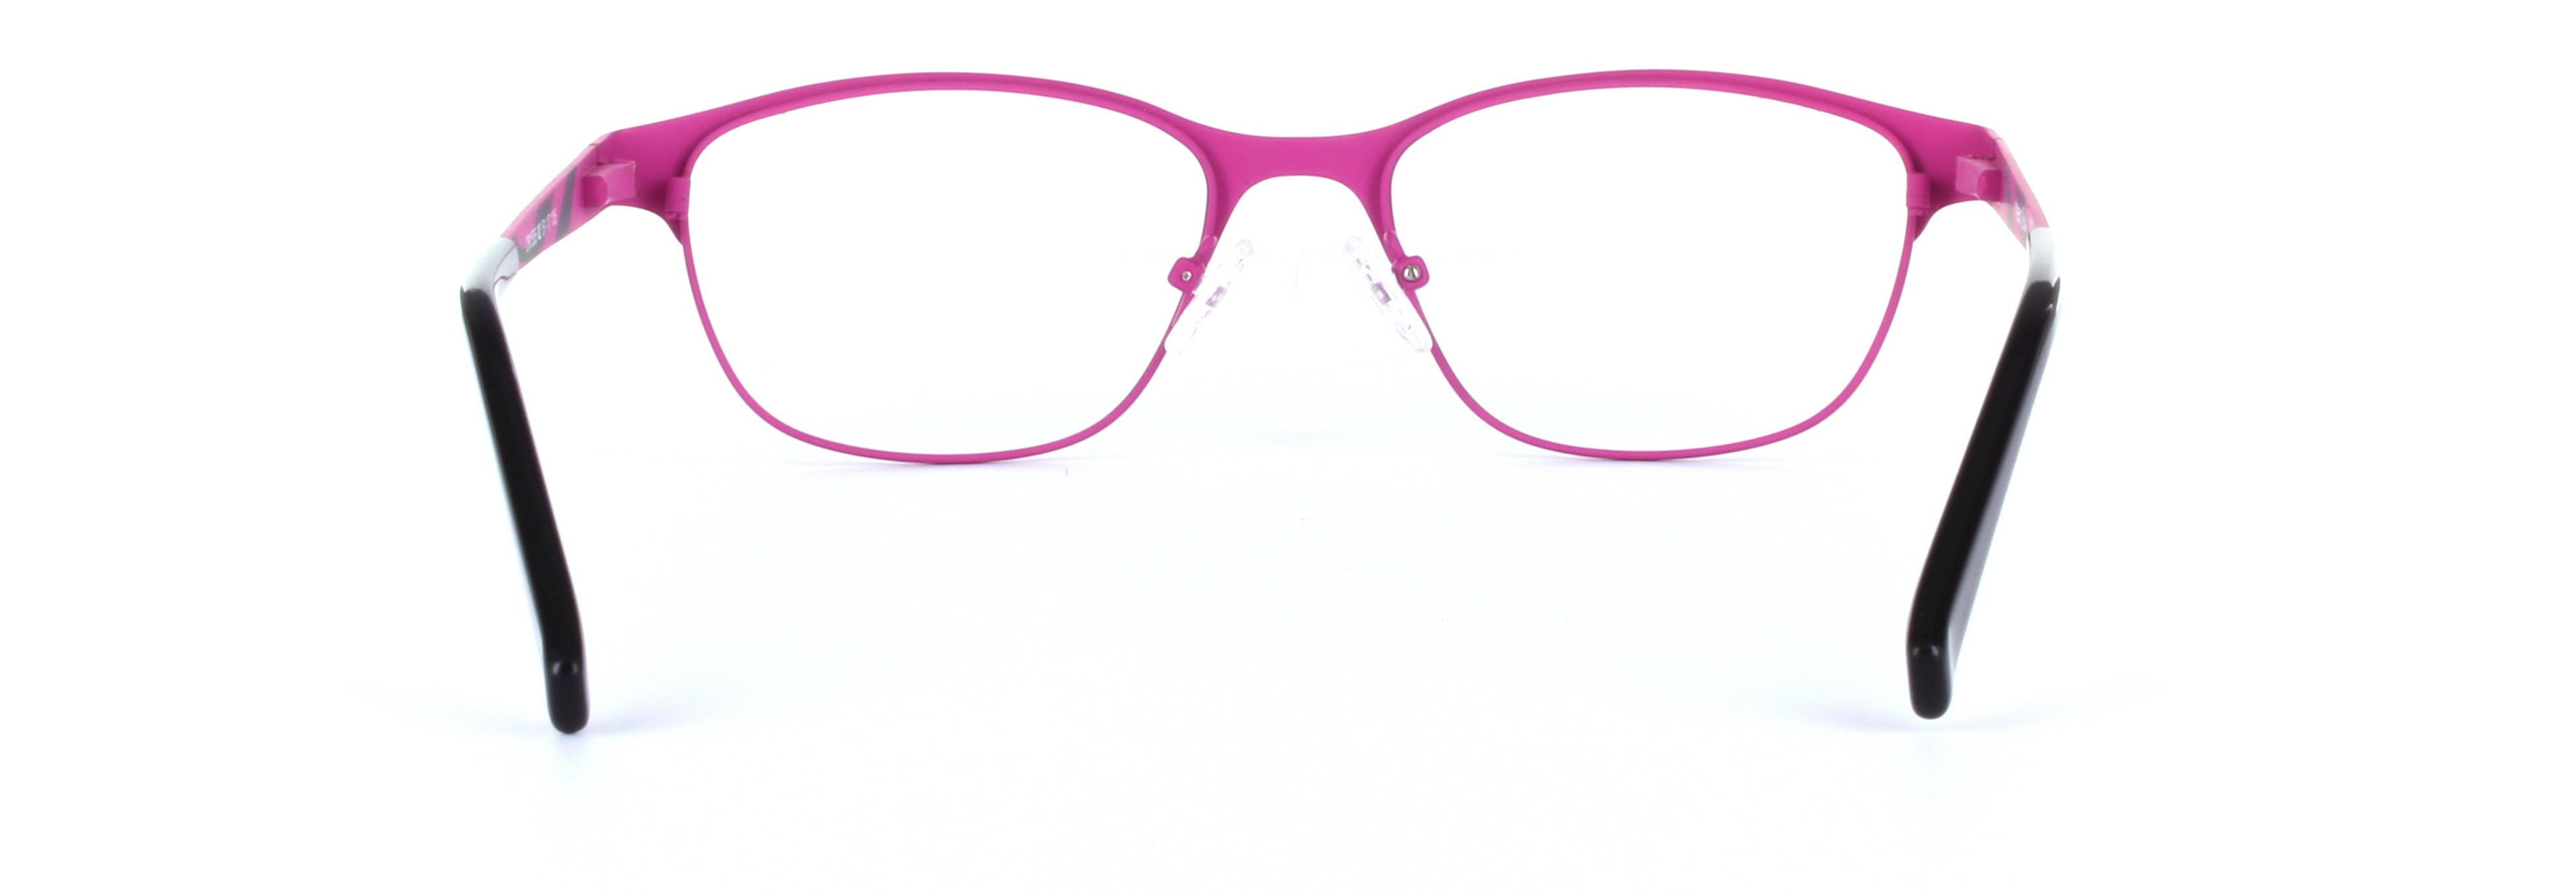 Brown and Pink Full Rim Oval Metal Glasses Lucie - Image View 3